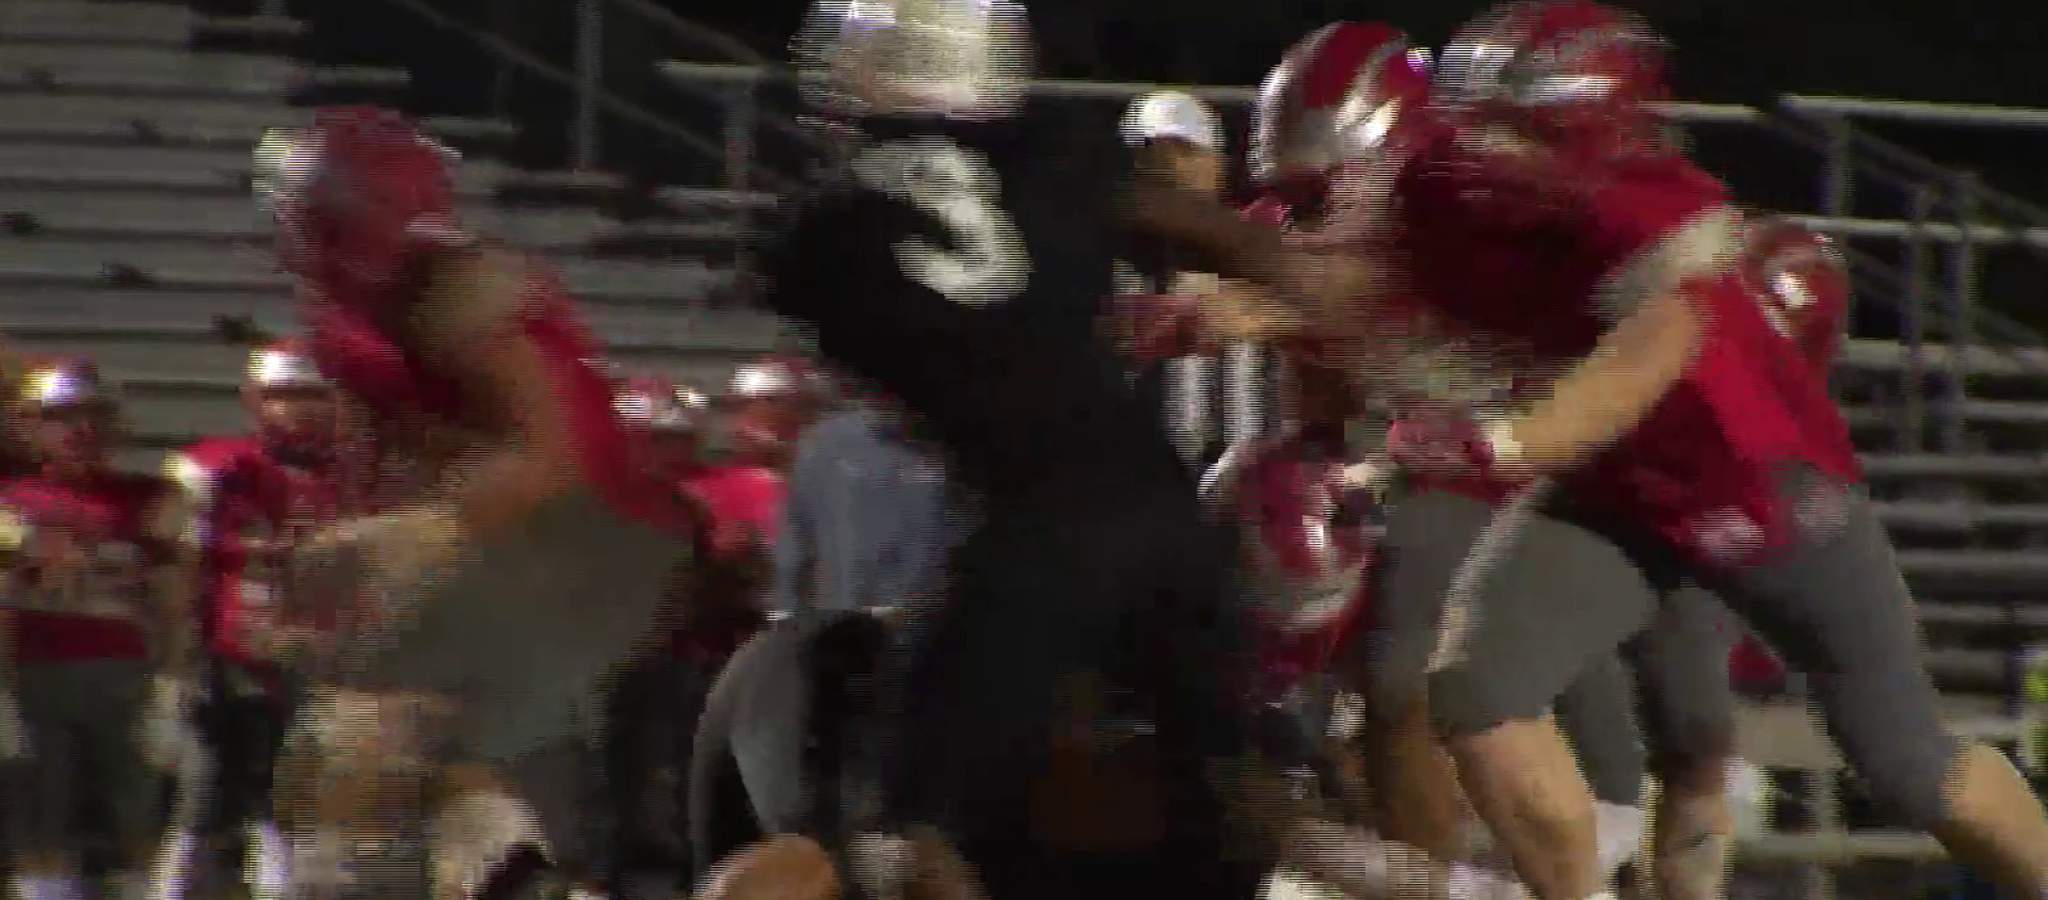 Lord Botetourt wins on the road against Staunton River